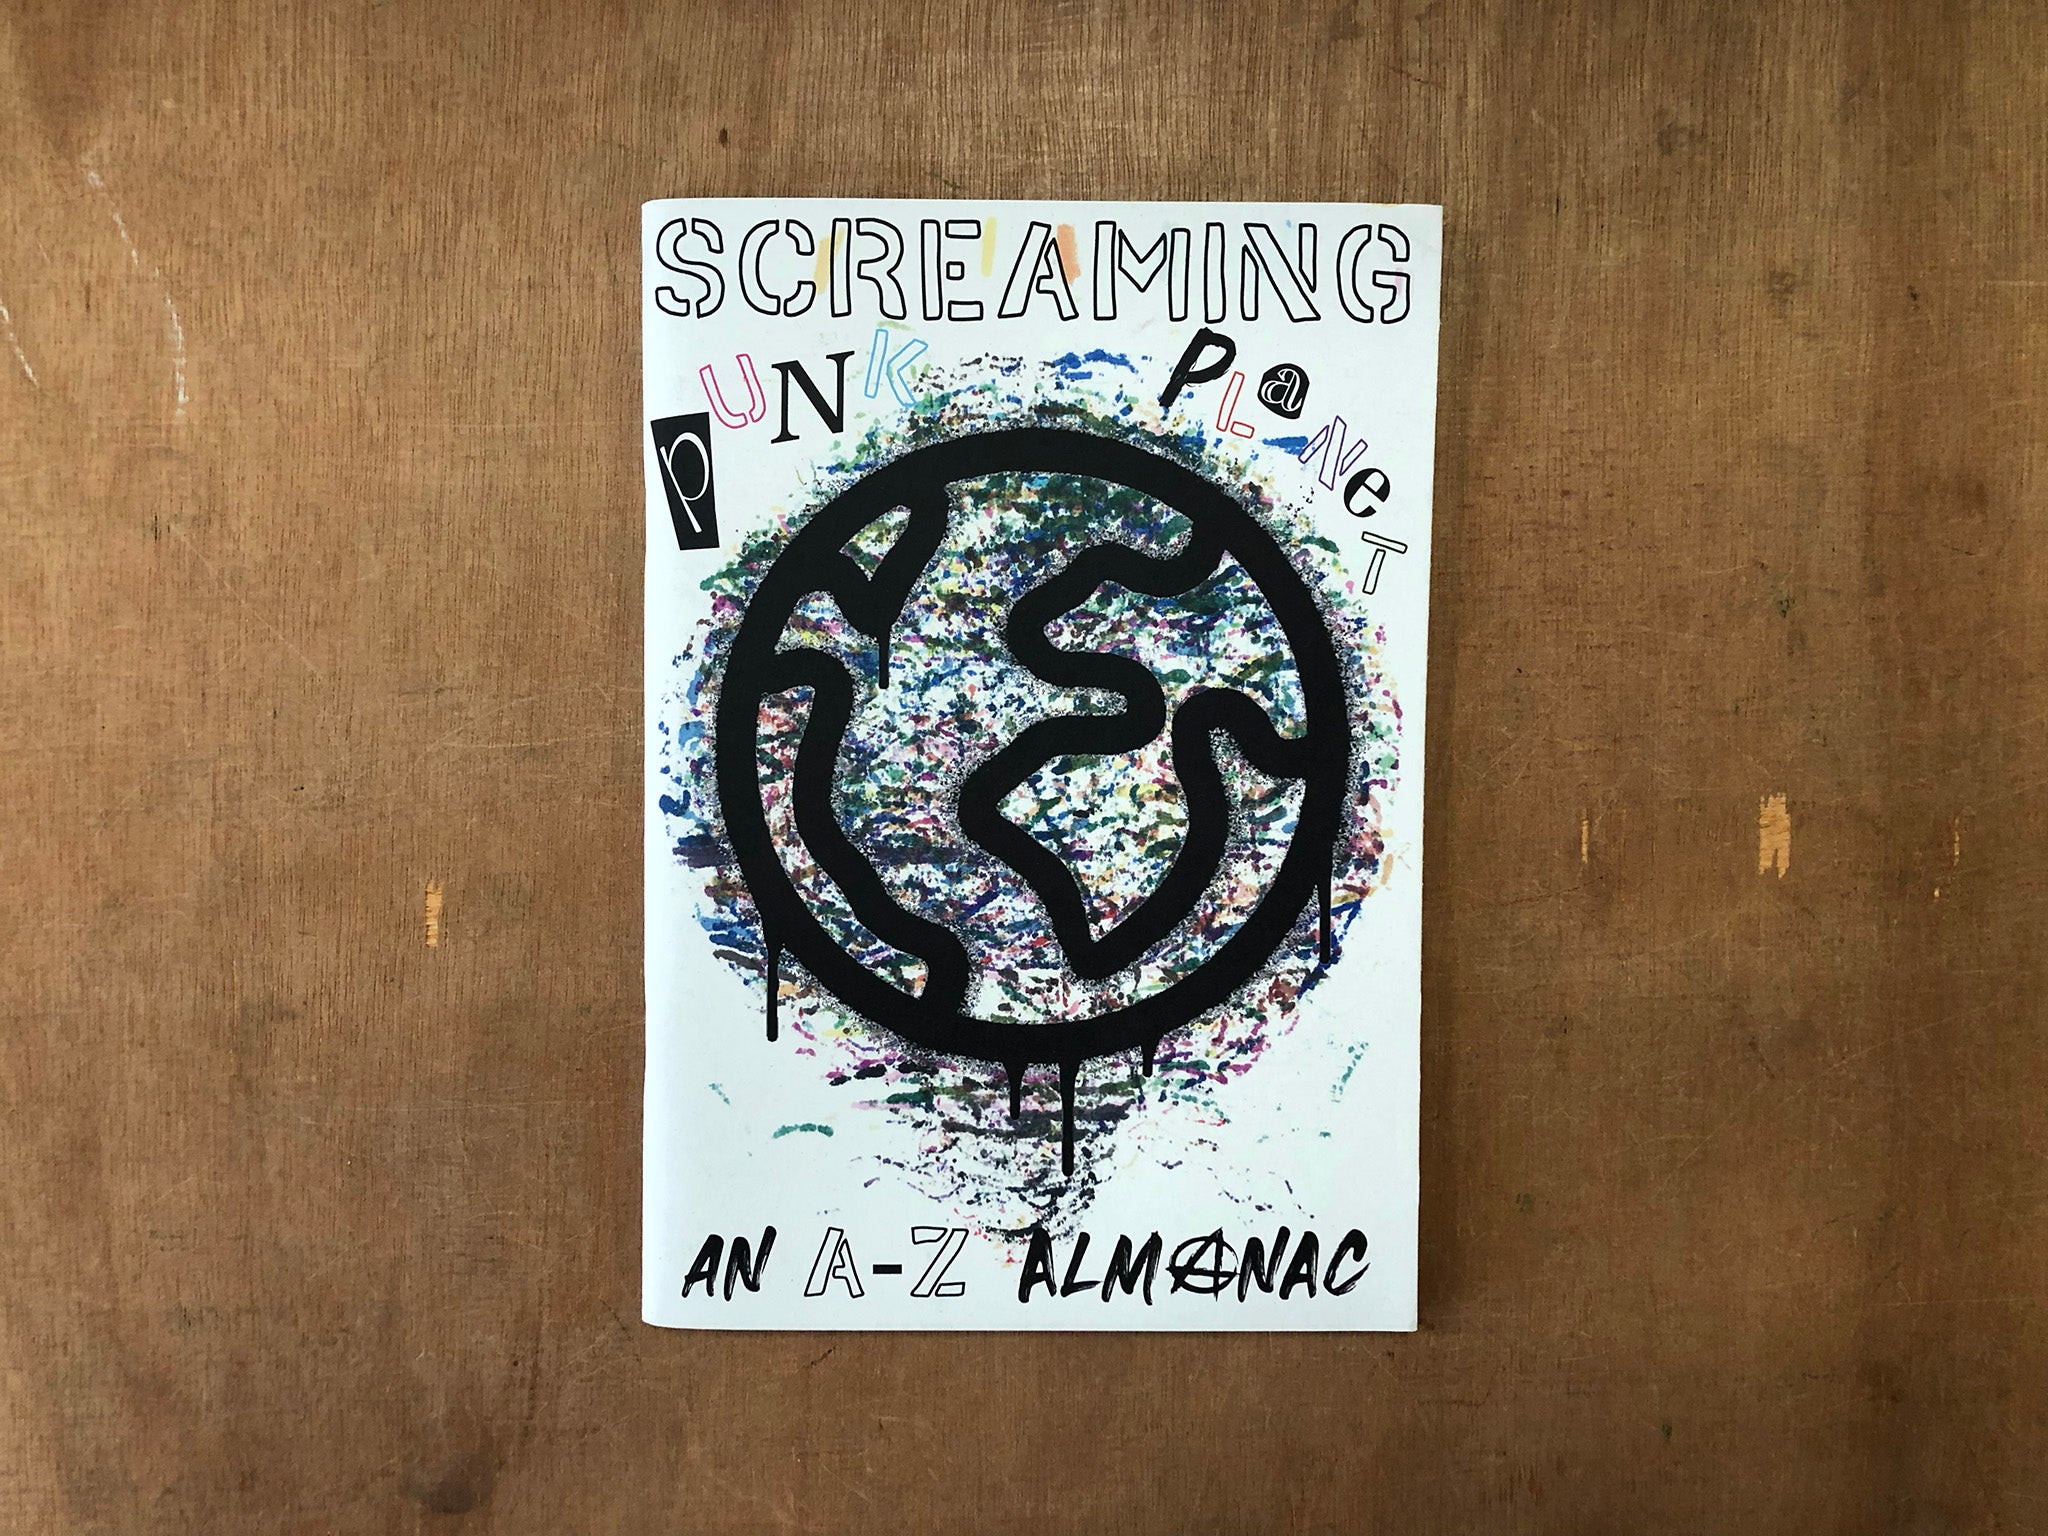 SCREAMING PUNK PLANET: AN A-Z ALMANAC by Dave Emmerson